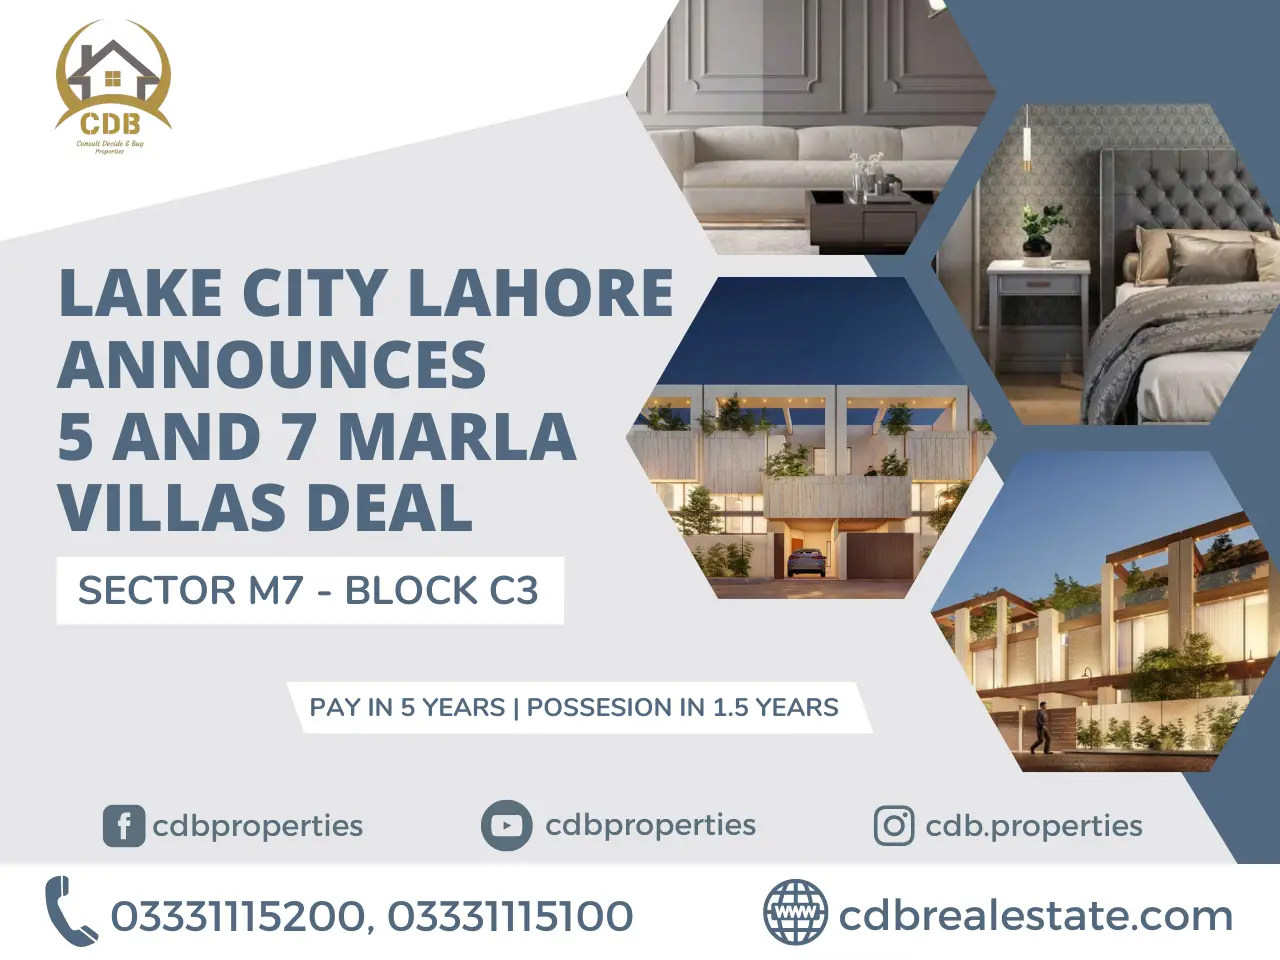 Lake City Lahore Announces 5 And 7 Marla Villas Deal In Sector M7 - Block C3